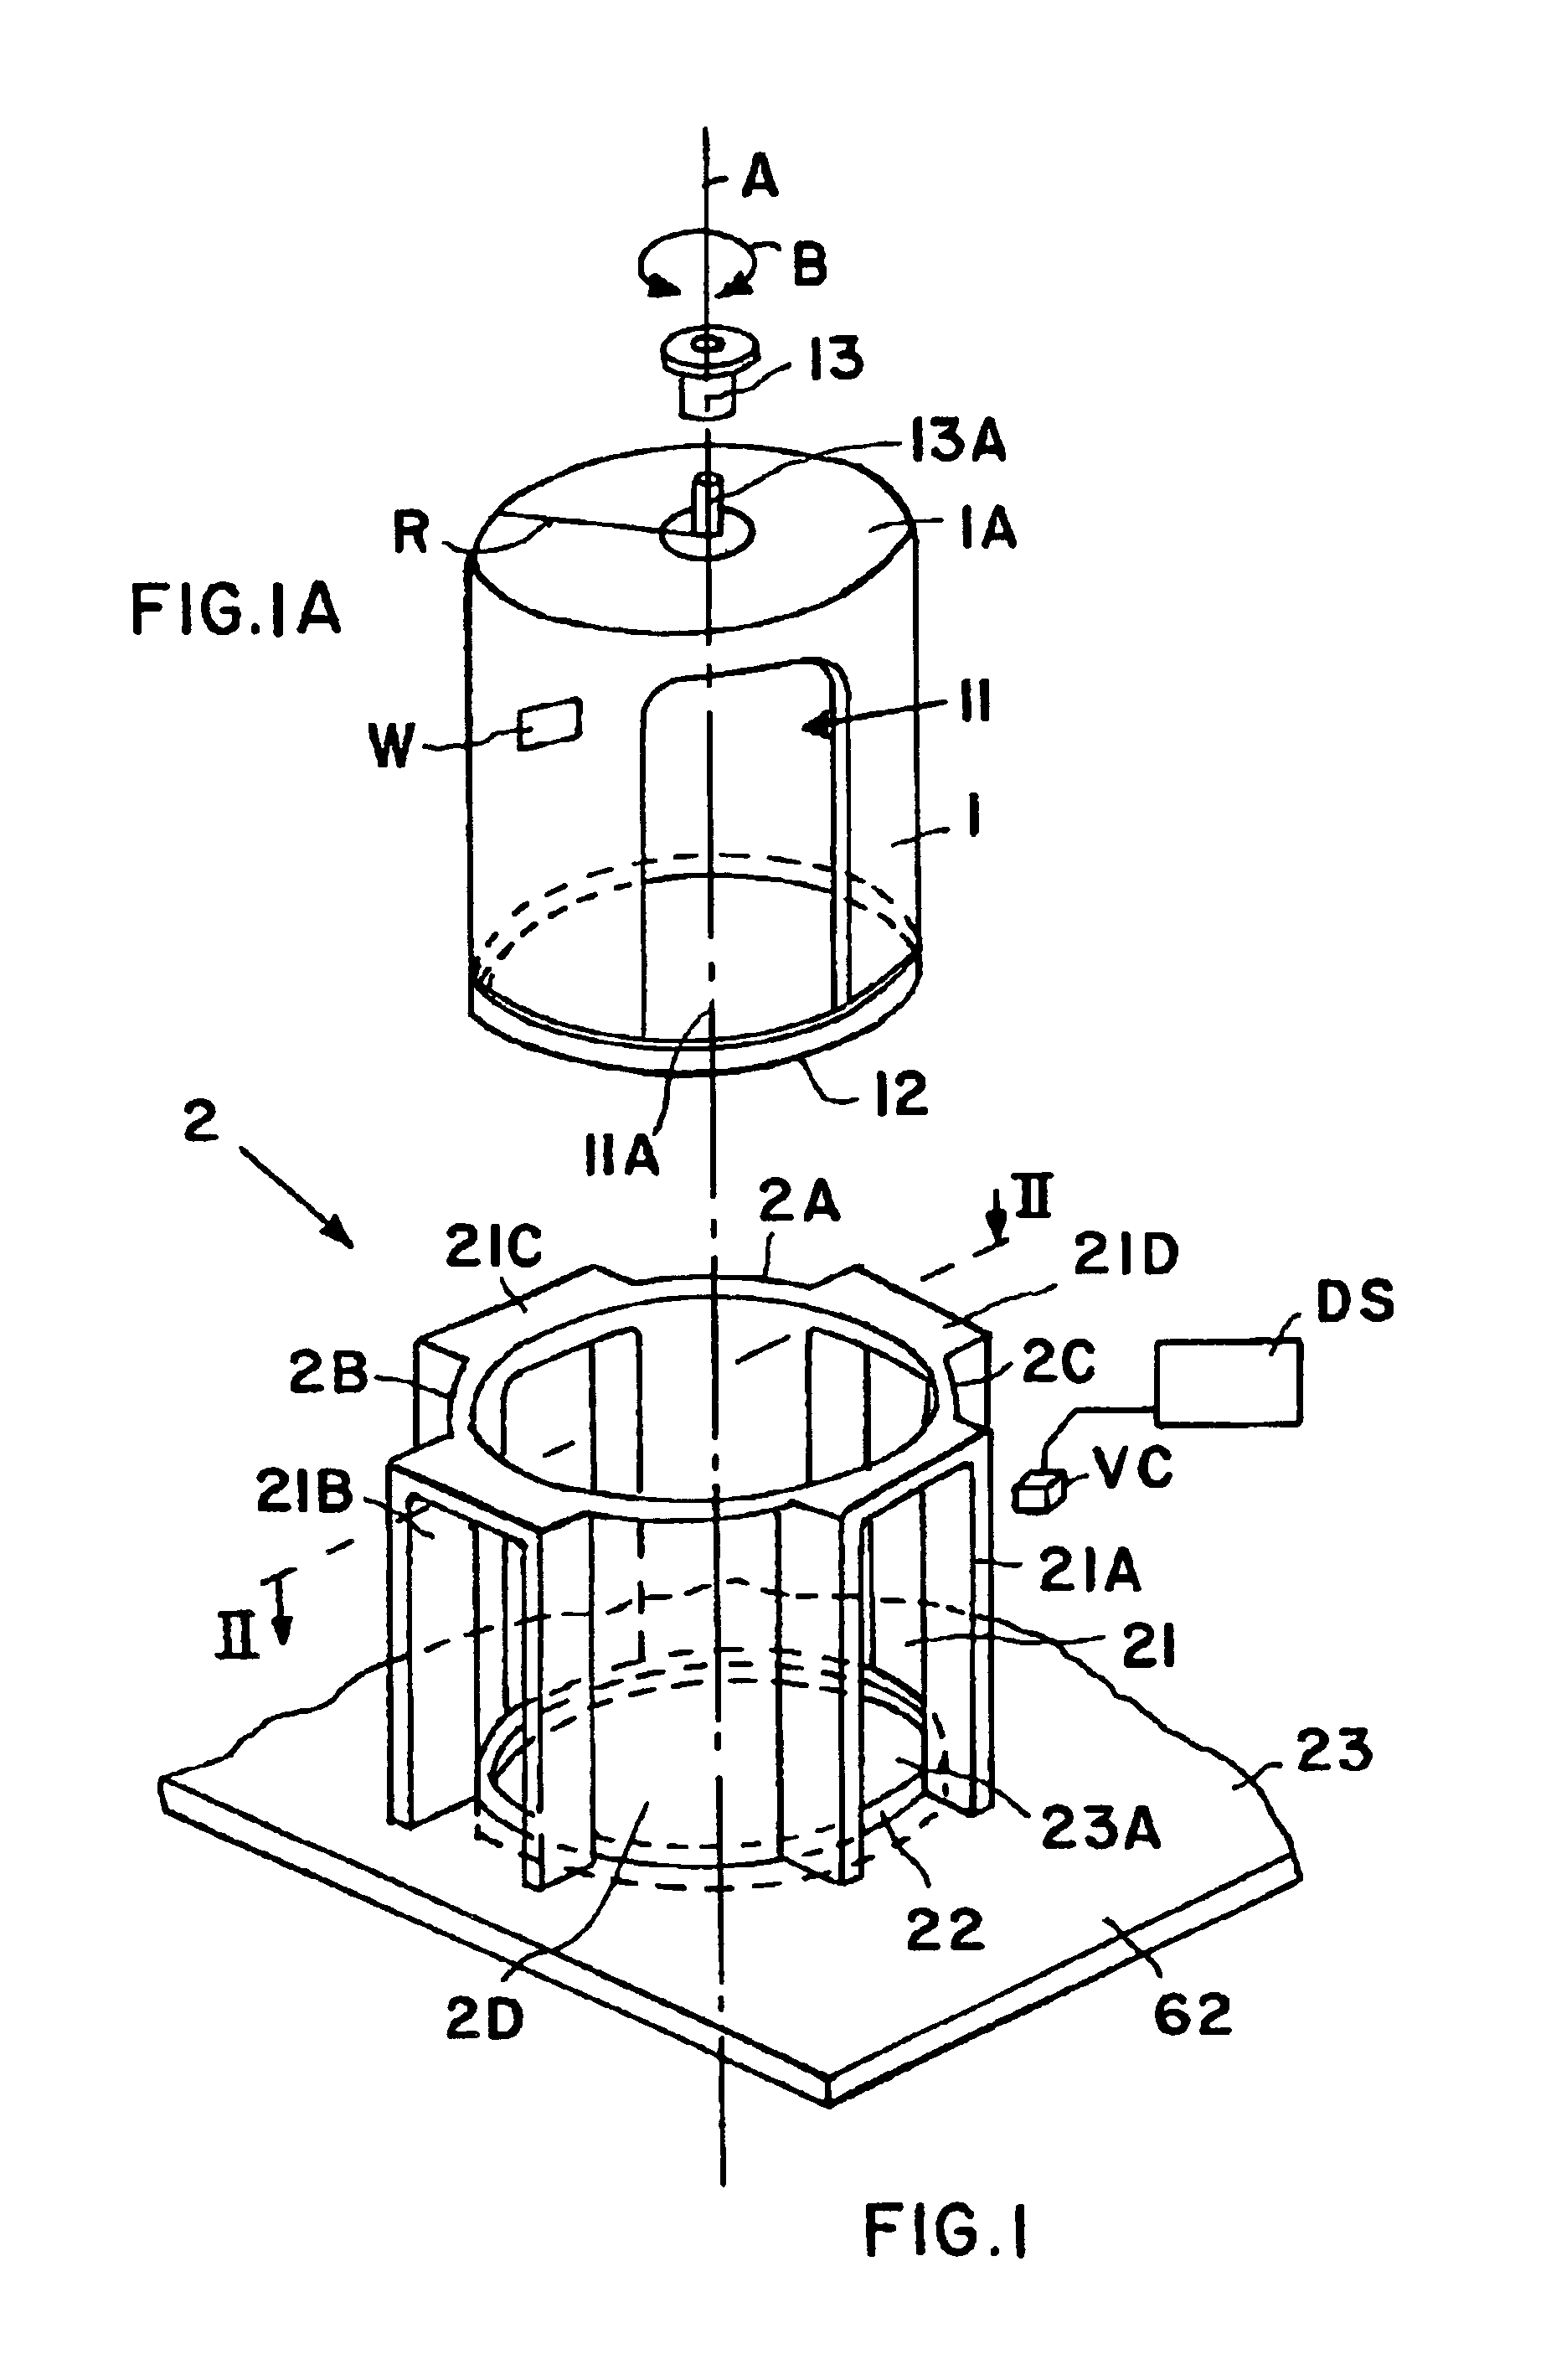 Apparatus for controlling the ingress and egress to and from an operator's compartment